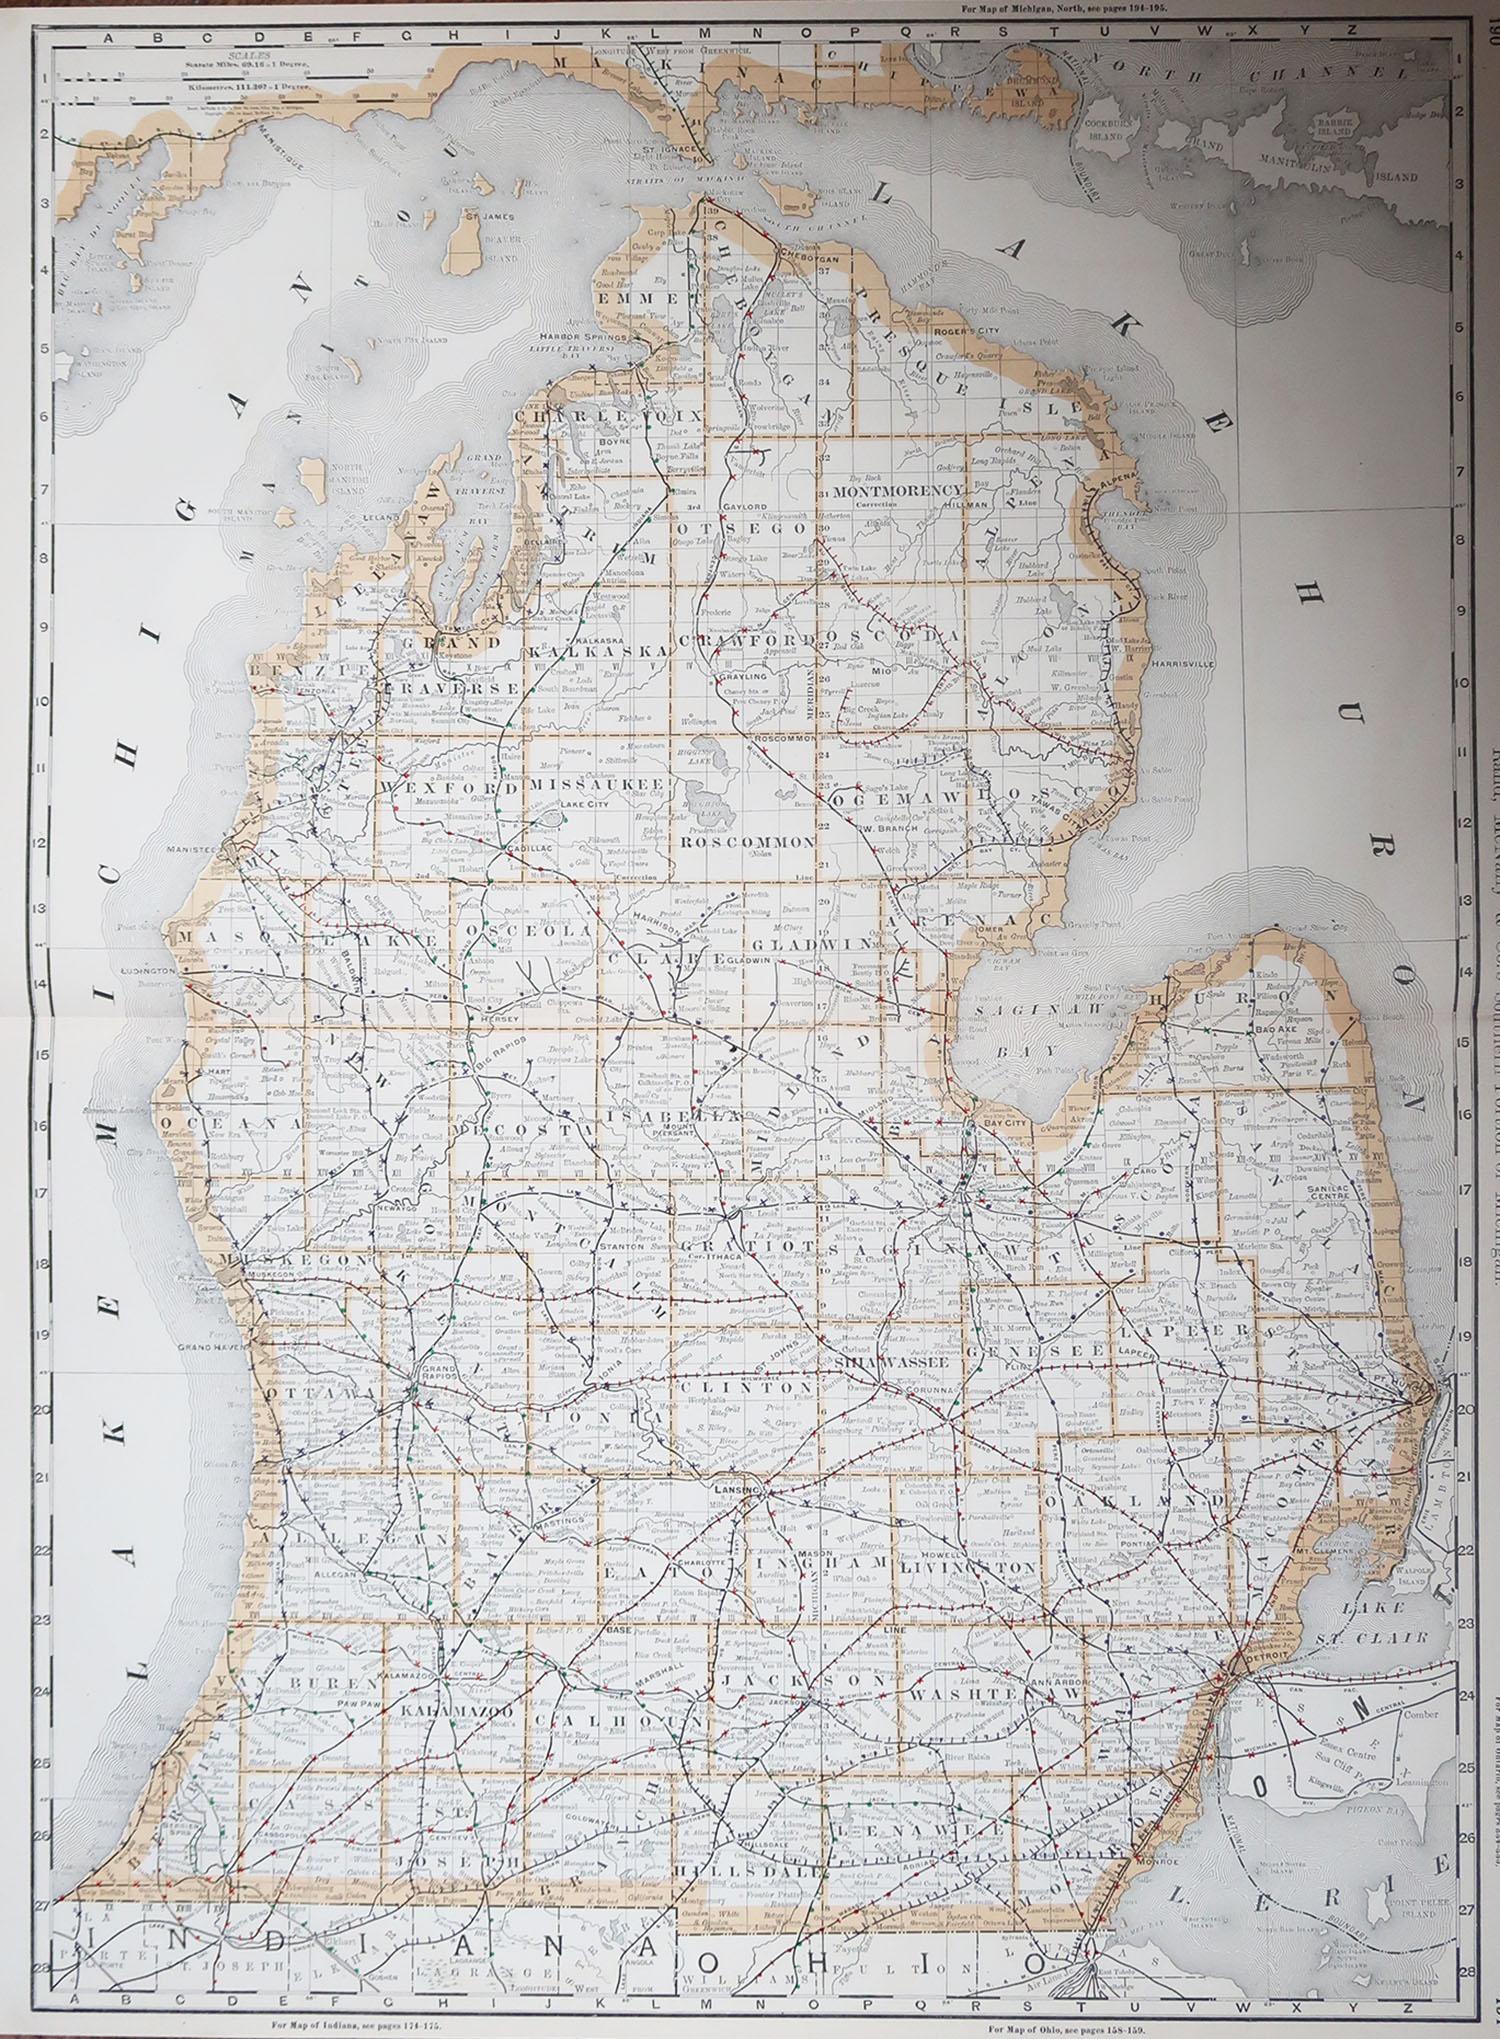 Fabulous map of Michigan South.

Original color.

By Rand, McNally & Co.

Published, 1894.

Unframed.

Free shipping.